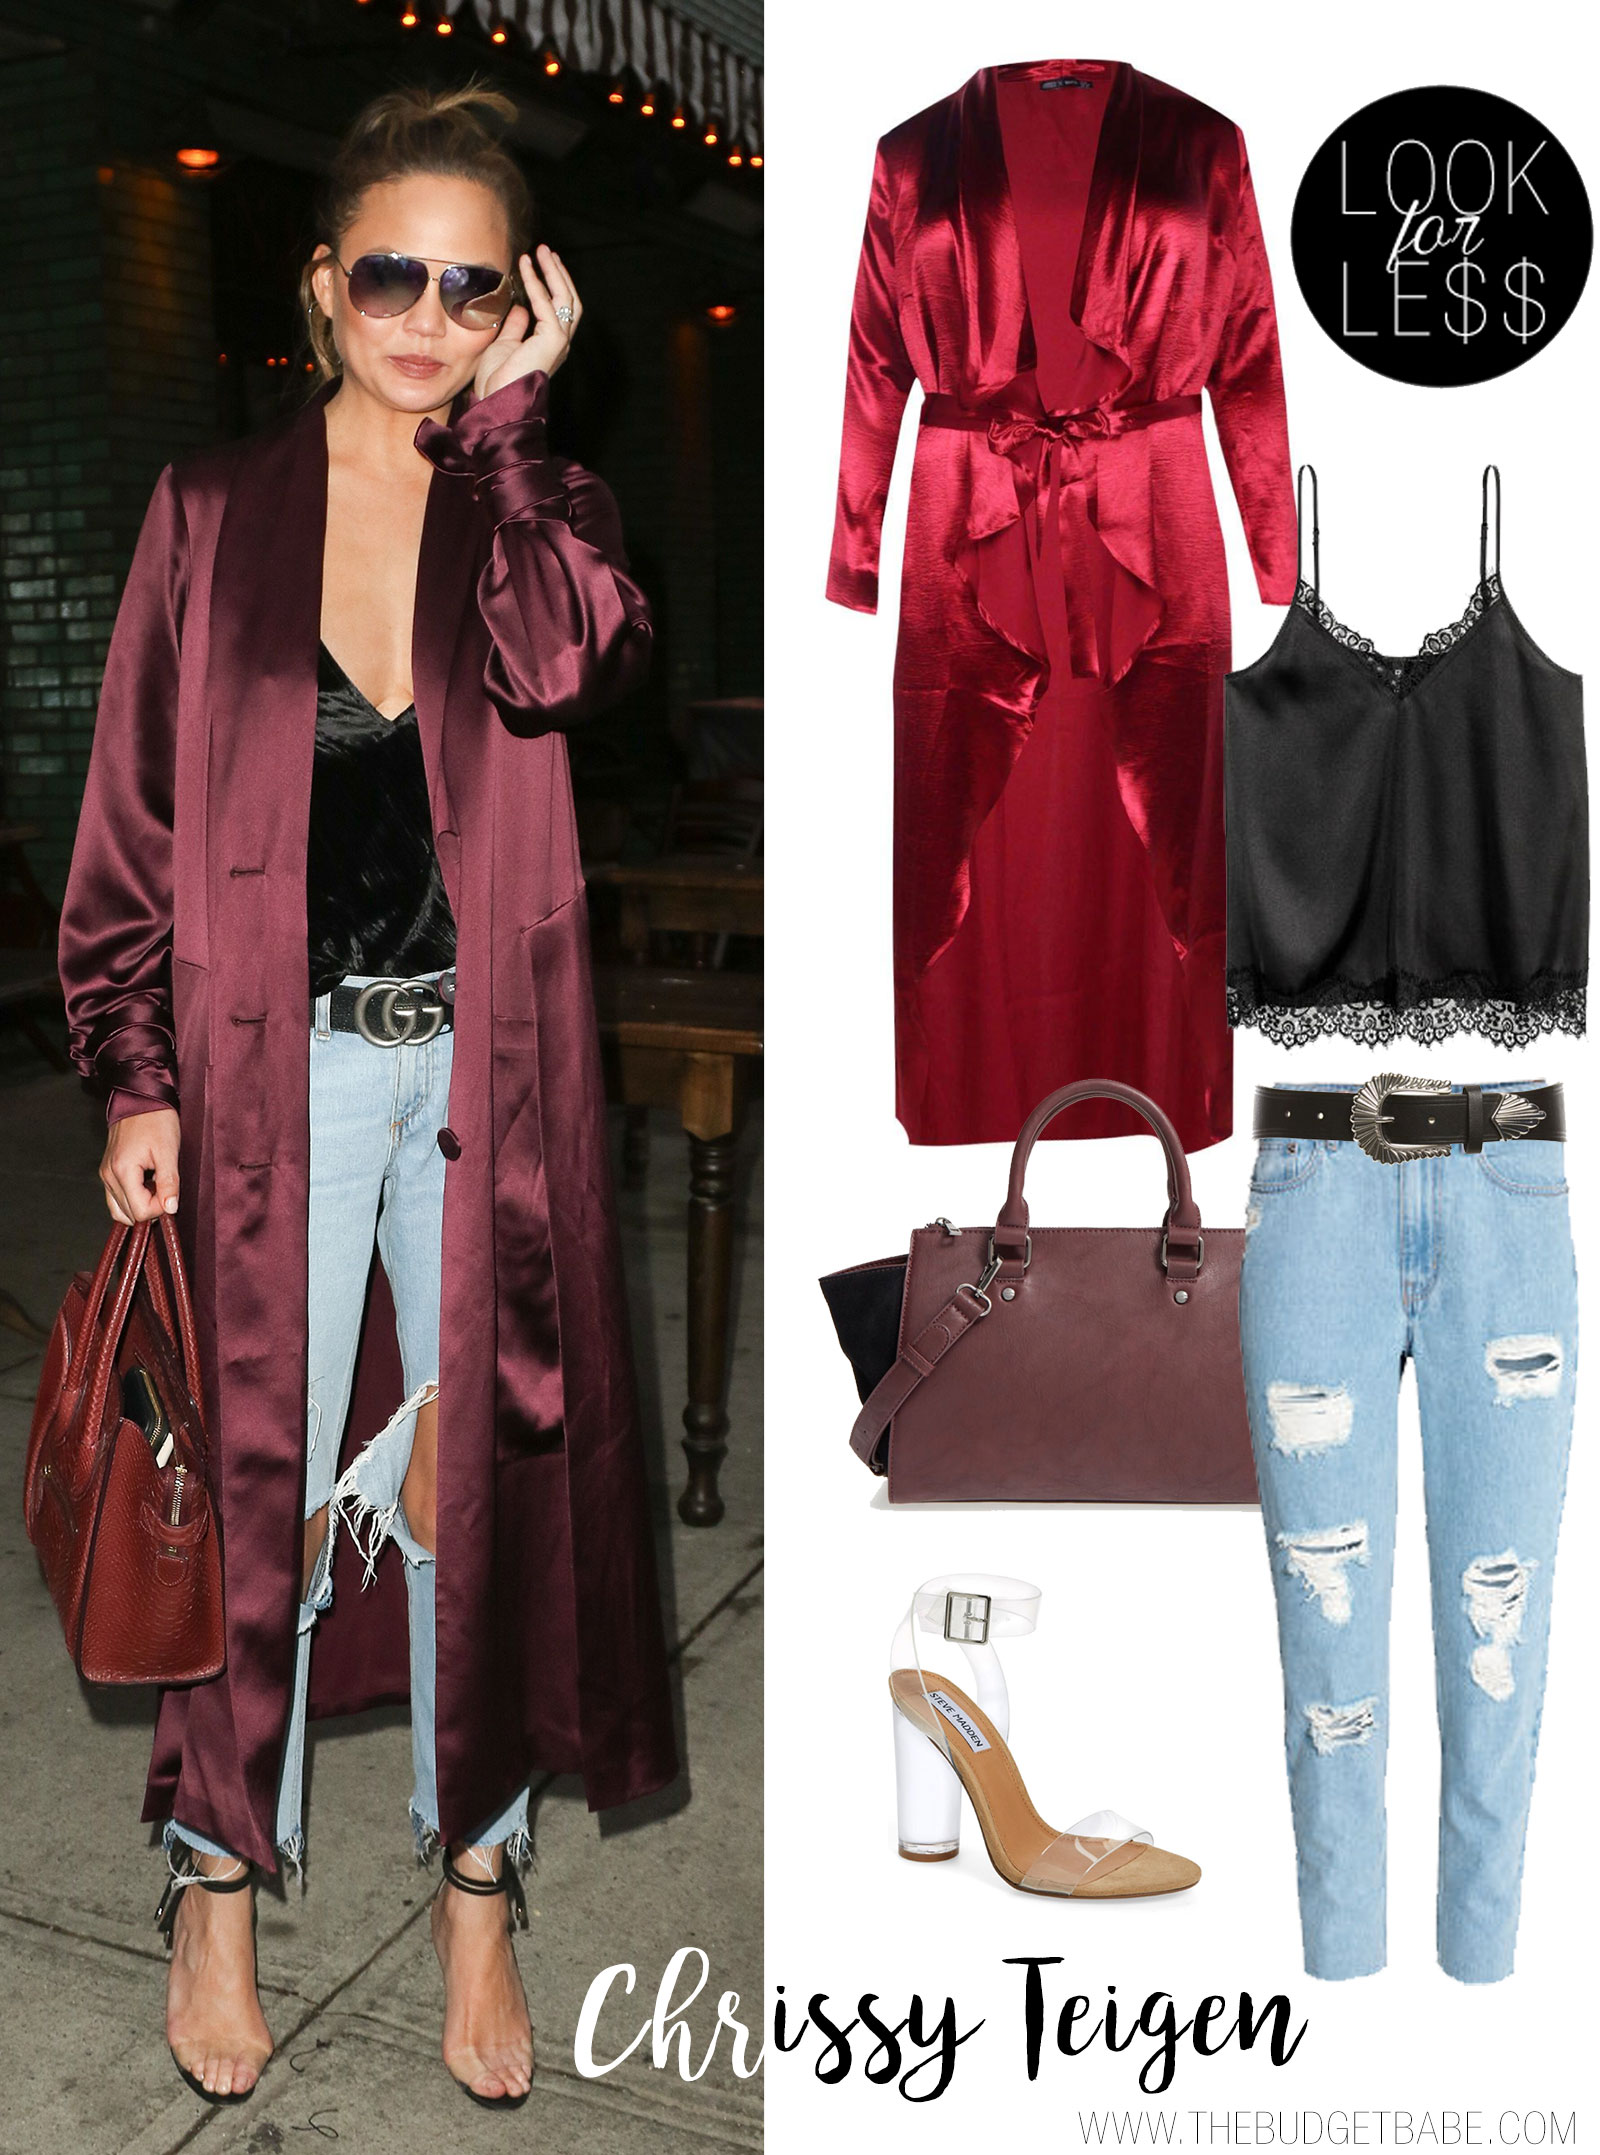 Chrissy Teigen steps out in a burgundy satin duster, ripped jeans and clear strap heels.